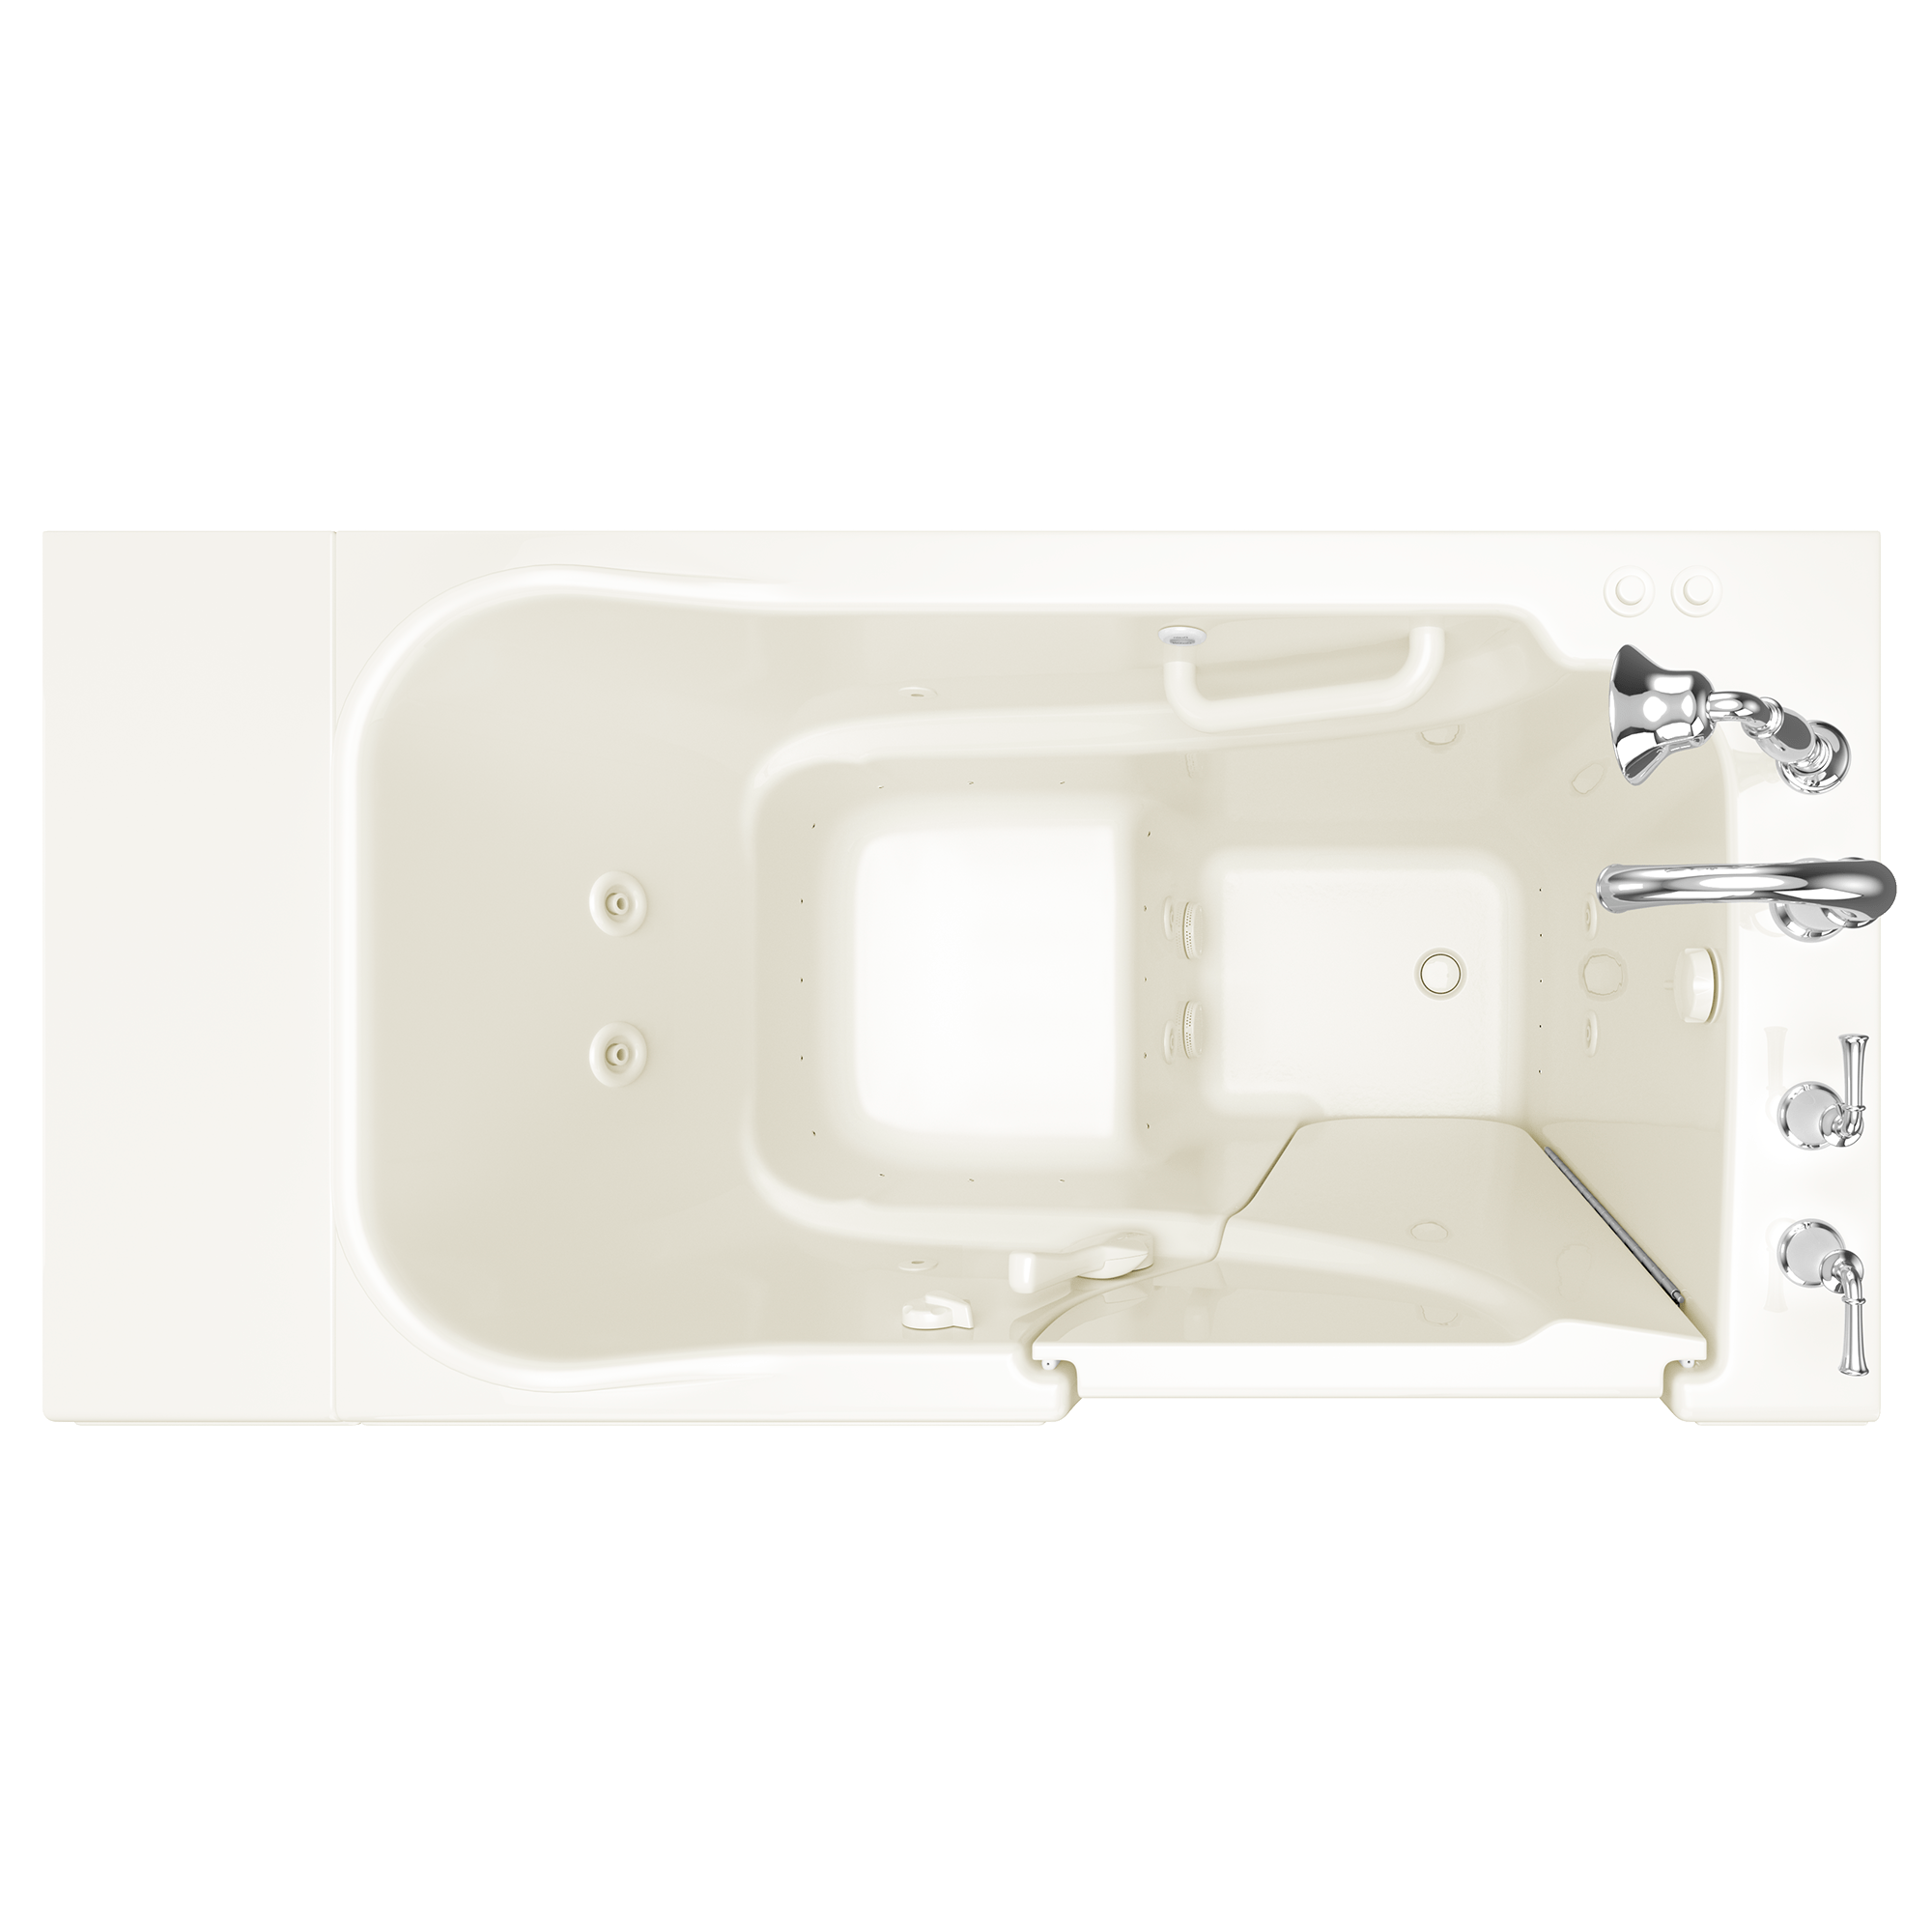 Gelcoat Value Series 30 x 52 -Inch Walk-in Tub With Combination Air Spa and Whirlpool Systems - Right-Hand Drain With Faucet